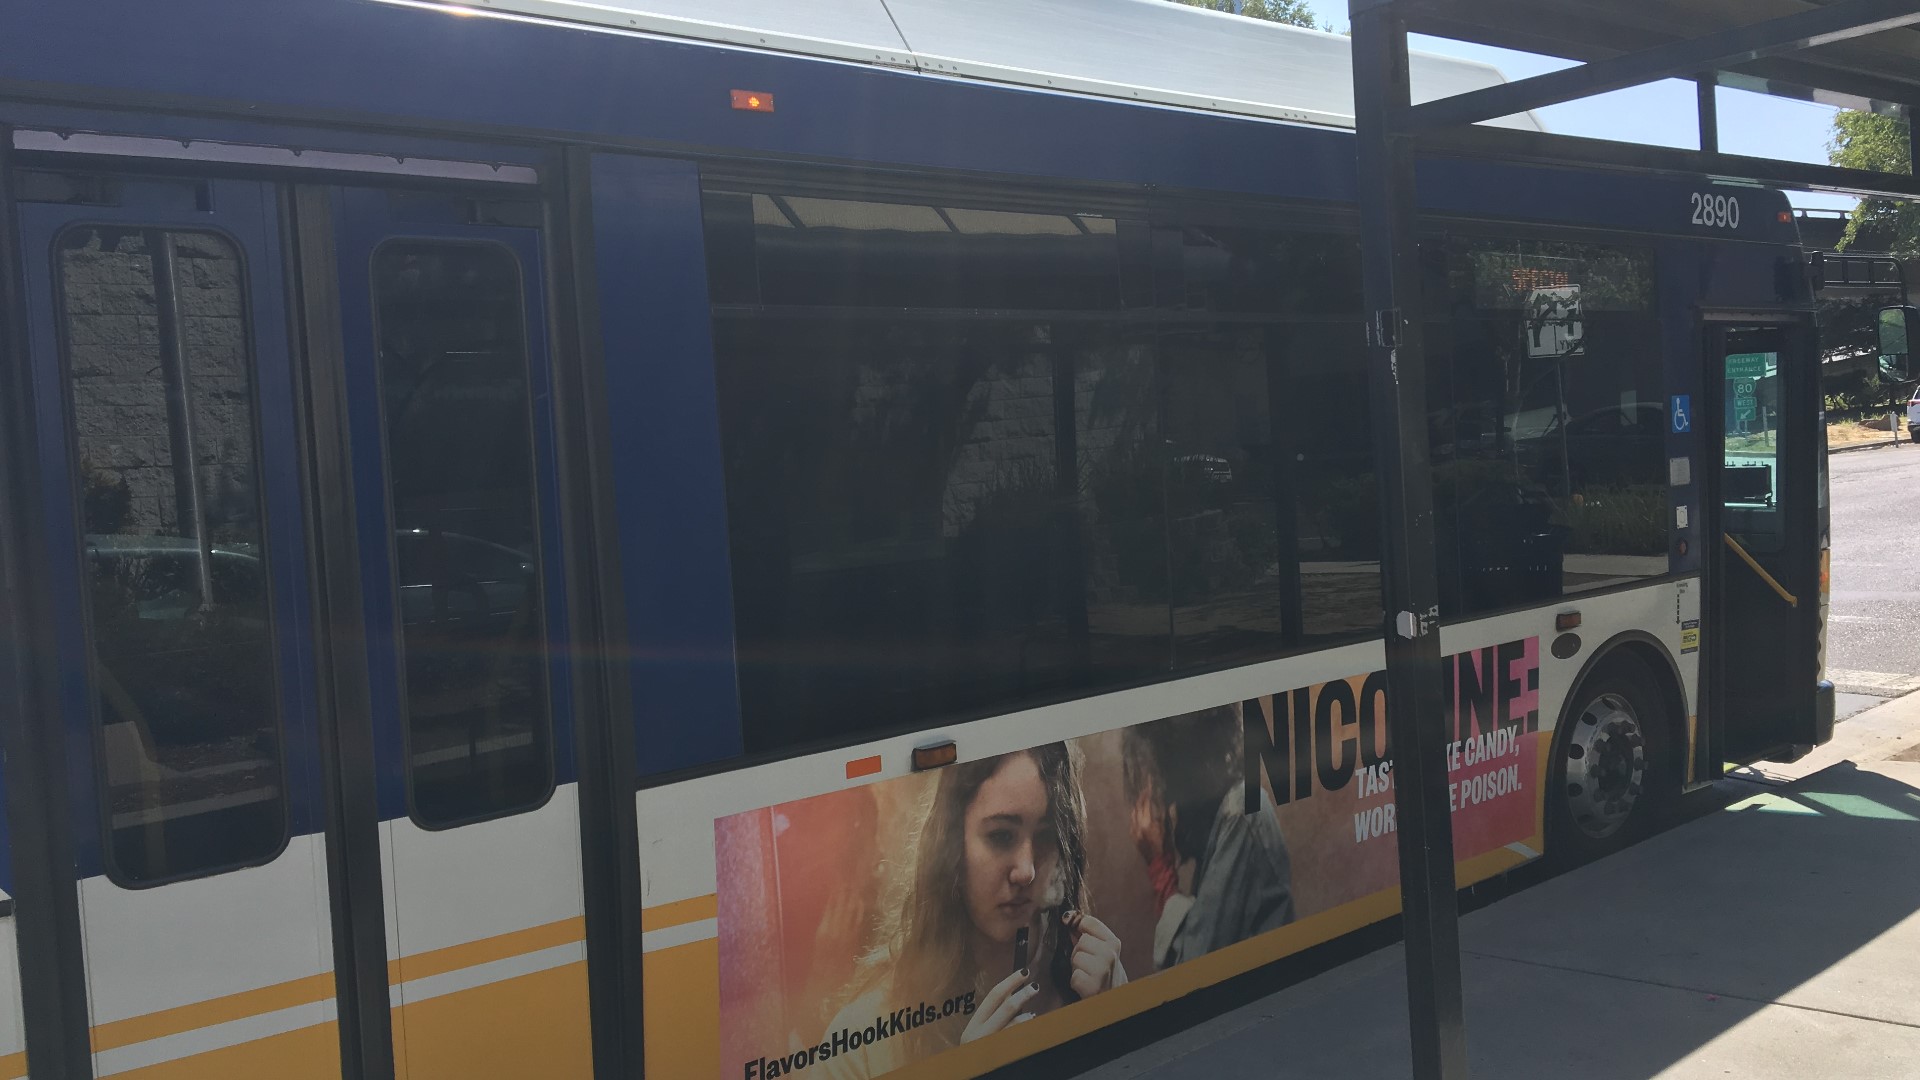 Sacramento Regional Transit launched a redesigned network on Sunday which led to some confusion for riders. SacRT anticipated such confusion and has developed a plan to assist others.